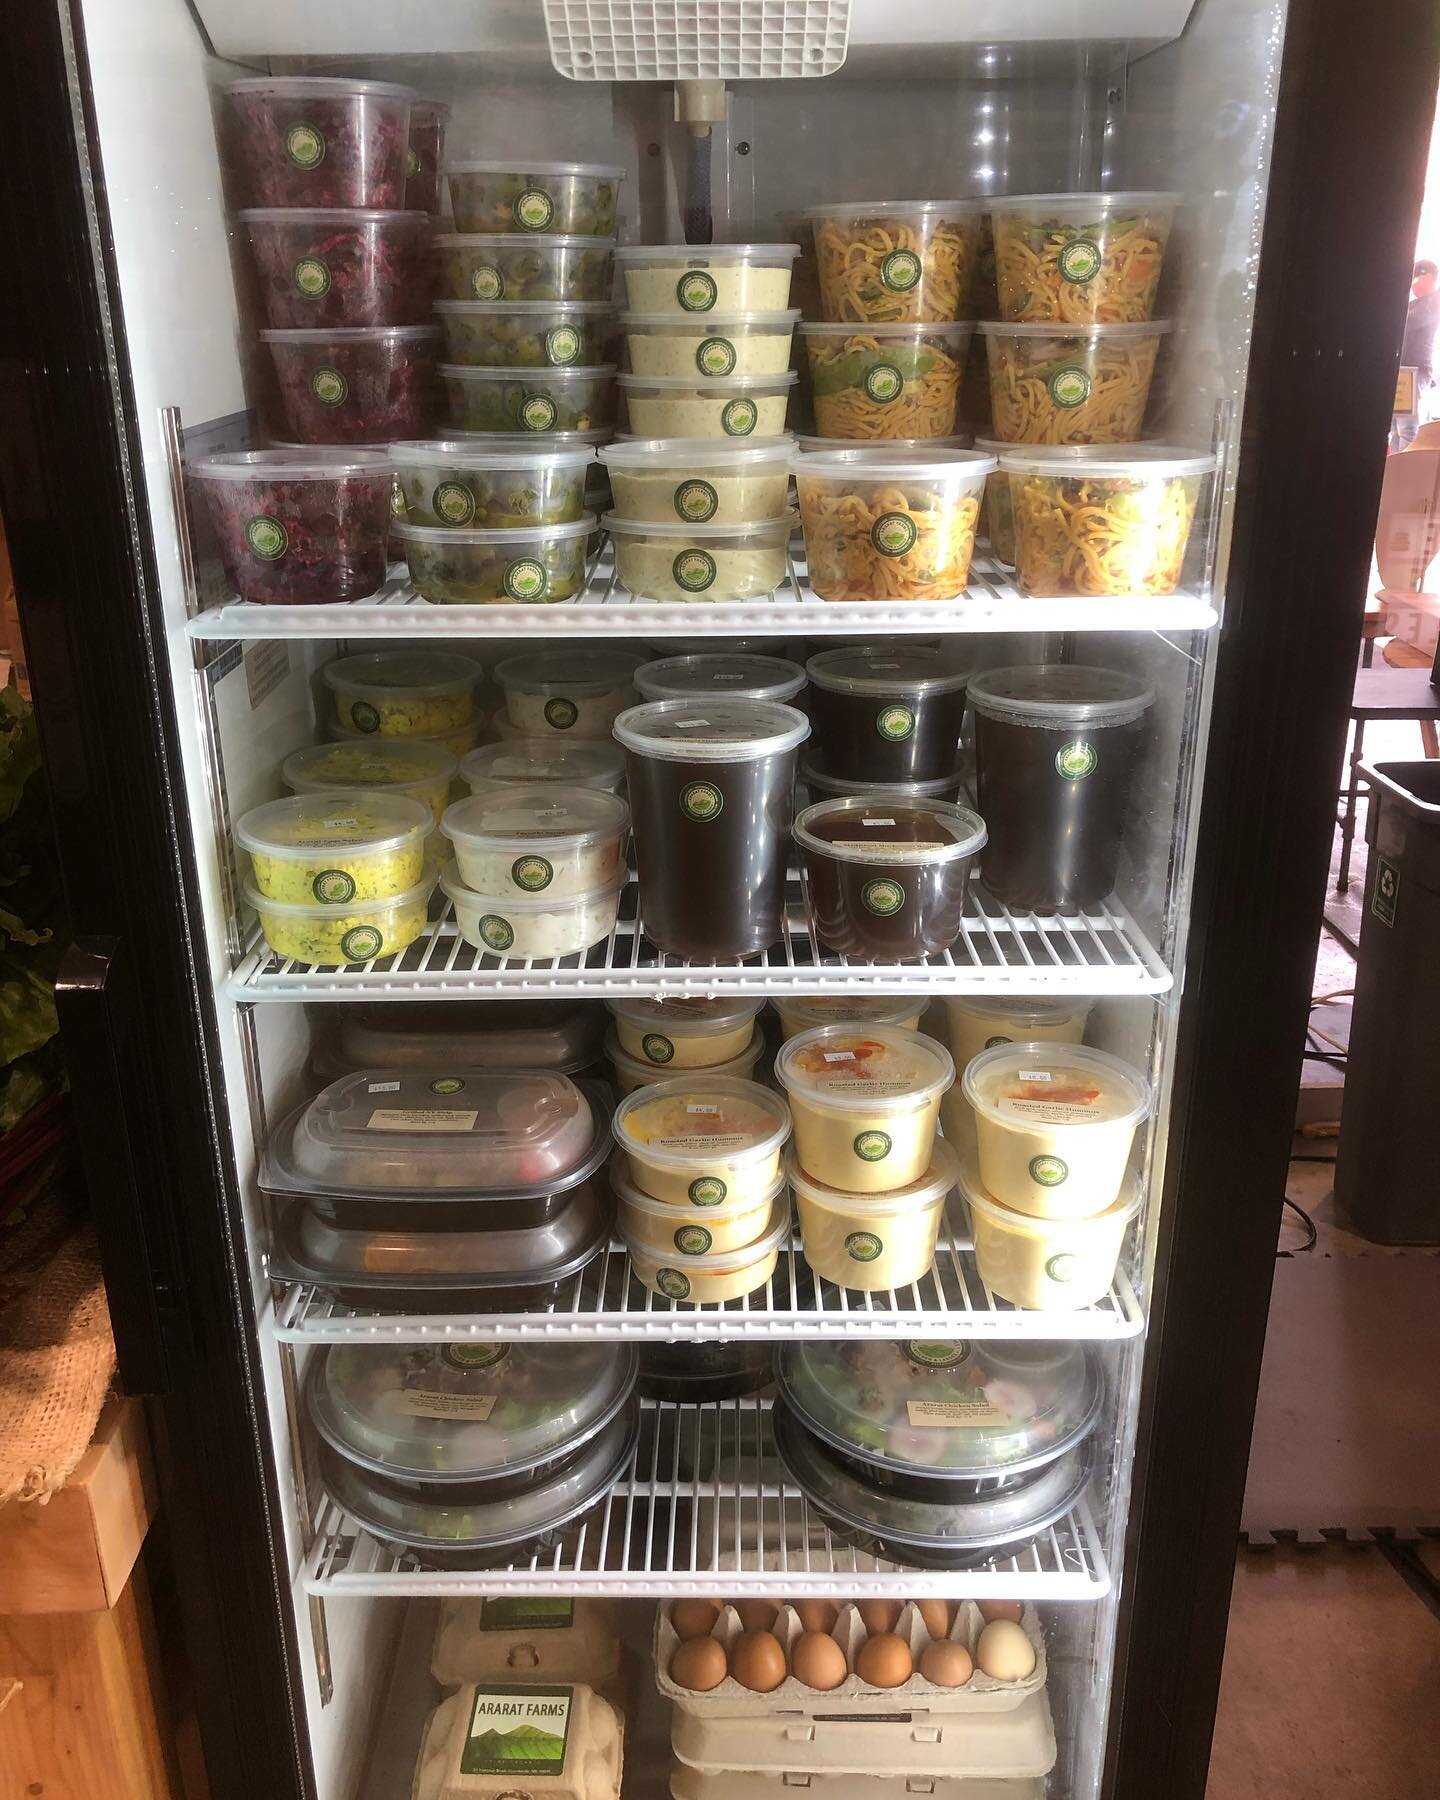 Our fridge stocked up with an array of delicious creations sourced from our farm ready to serve hungry customers at @unitedfarmersmarketofmaine every Saturday!